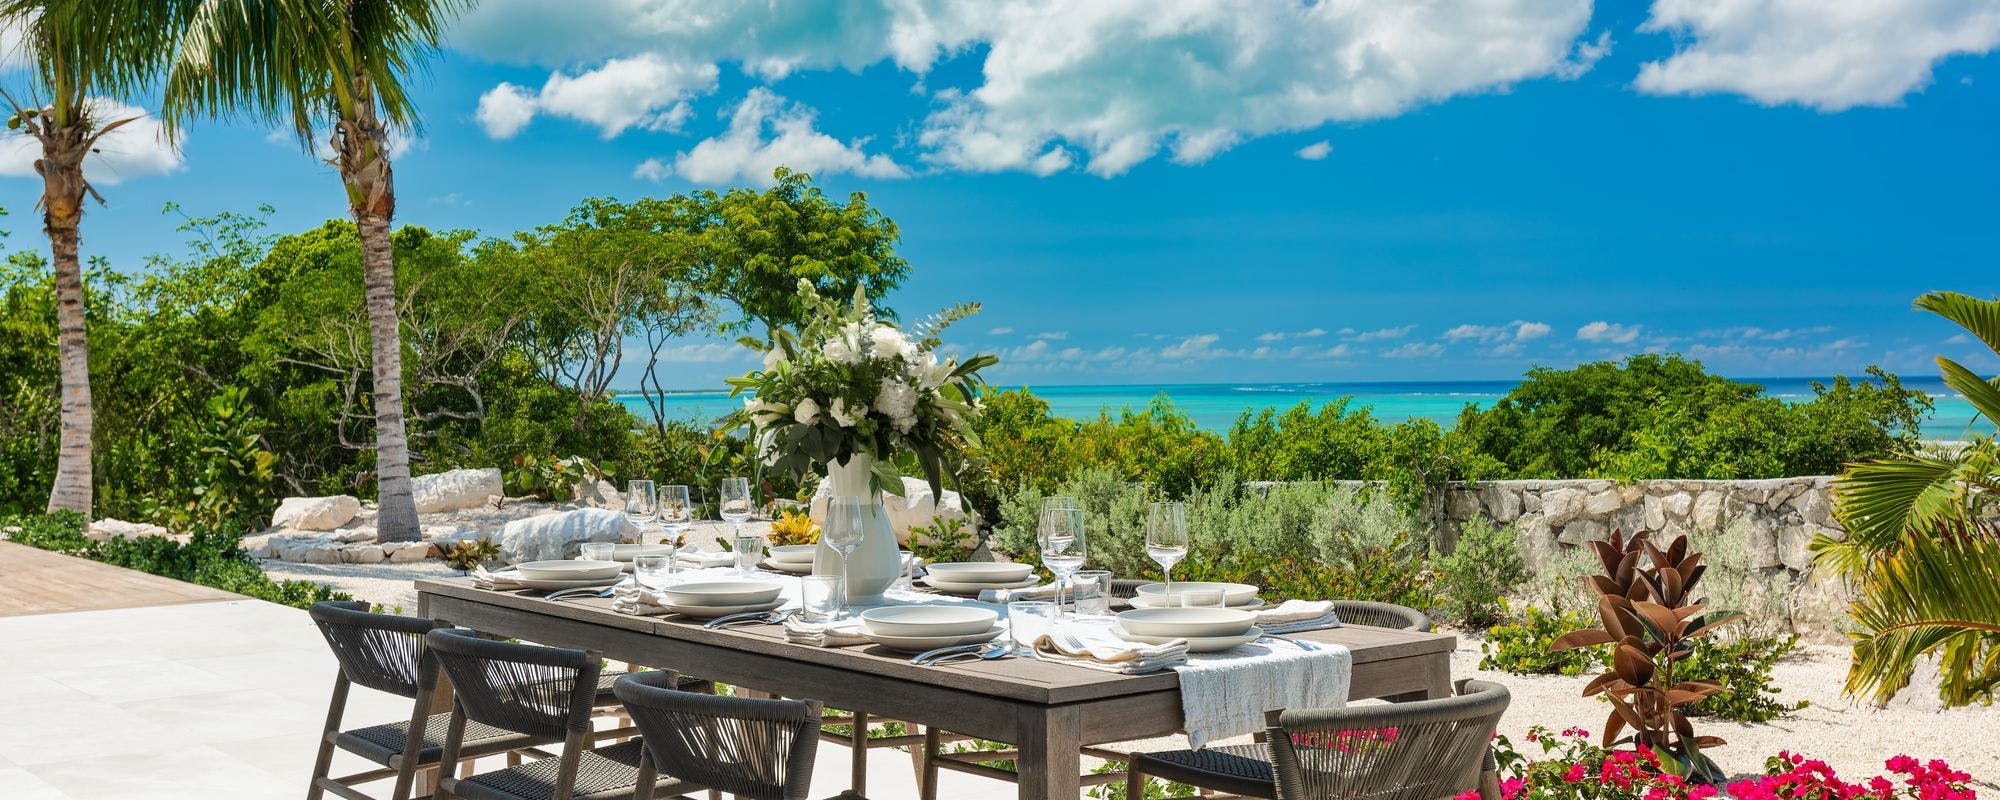 Outdoor living space with a view at this Turks and Caicos vacation rental.